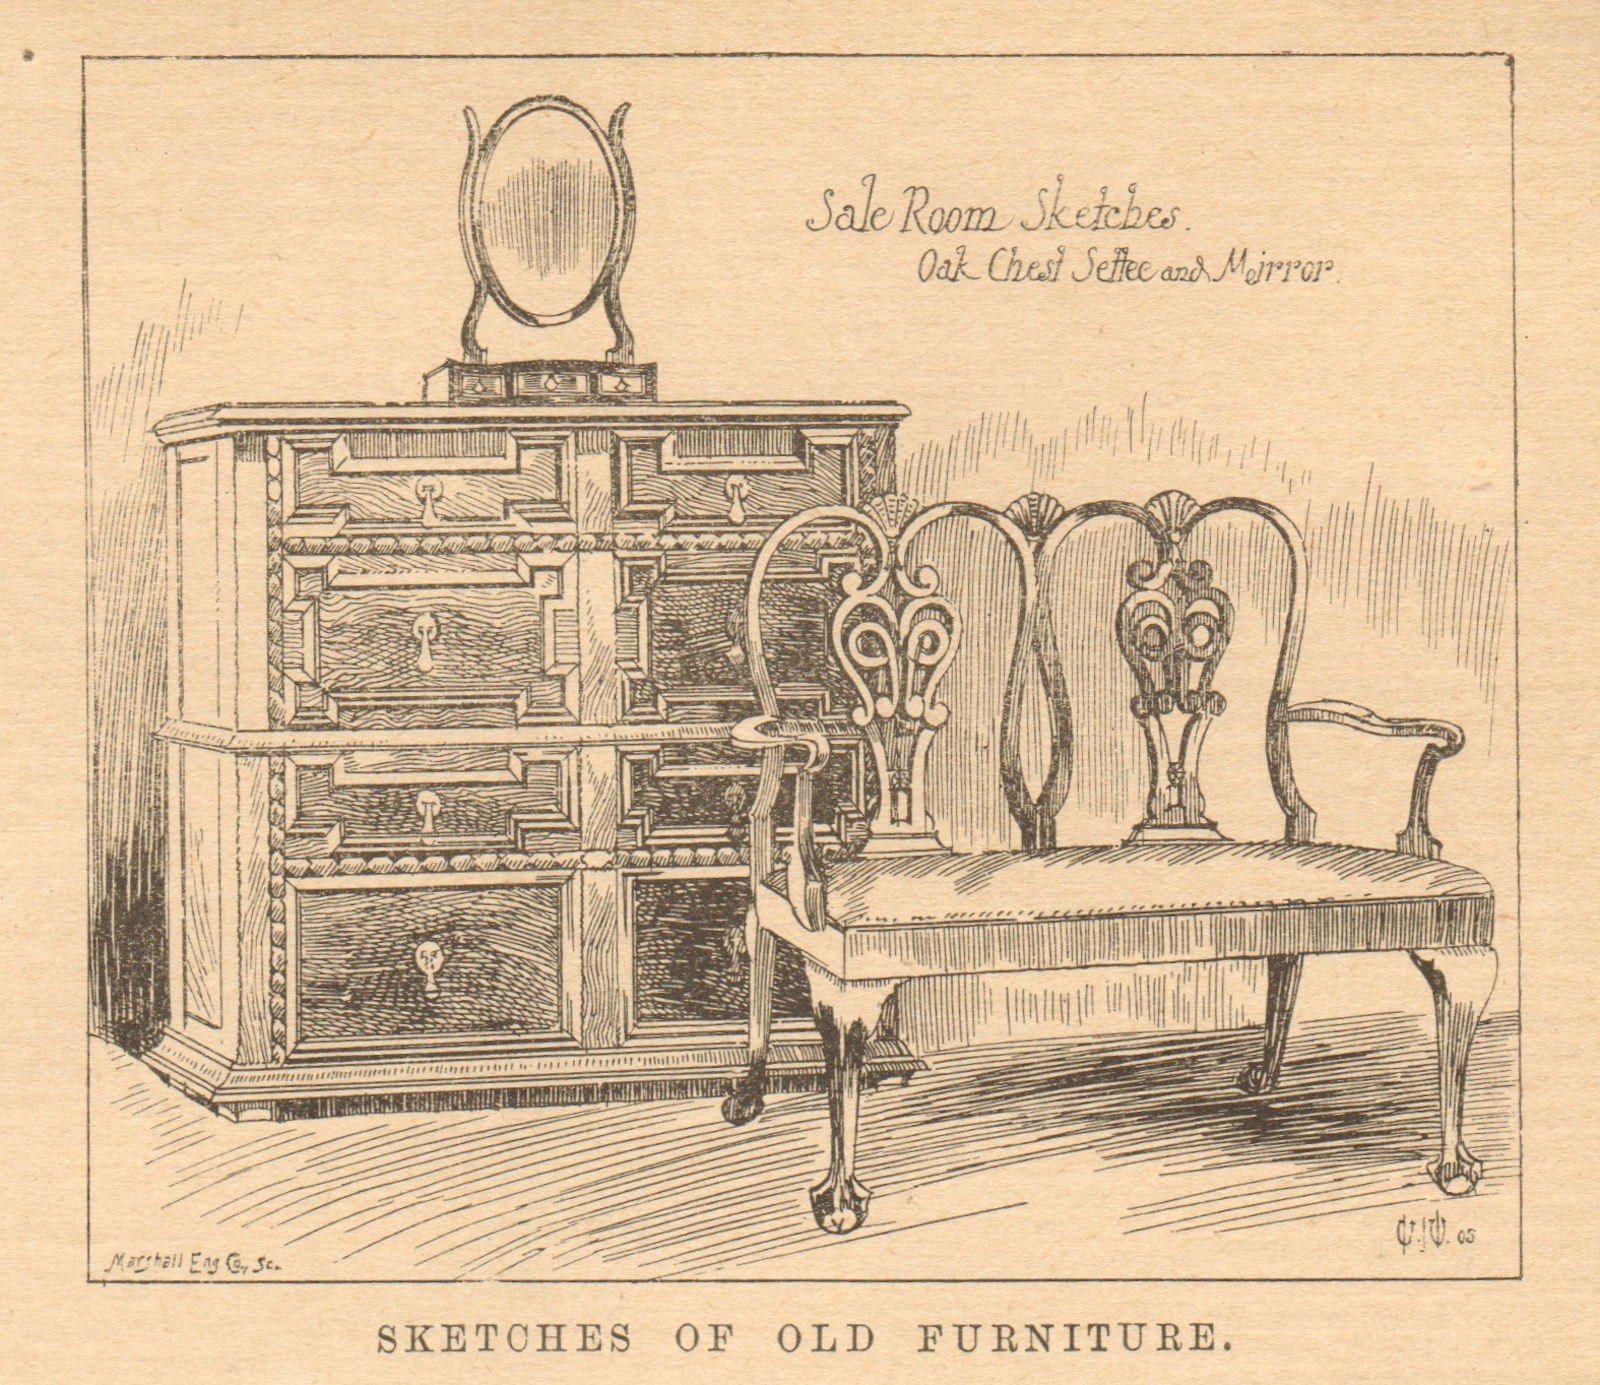 Associate Product Sketches of old furniture. Sale room sketches. oak chest & mirror 1905 print